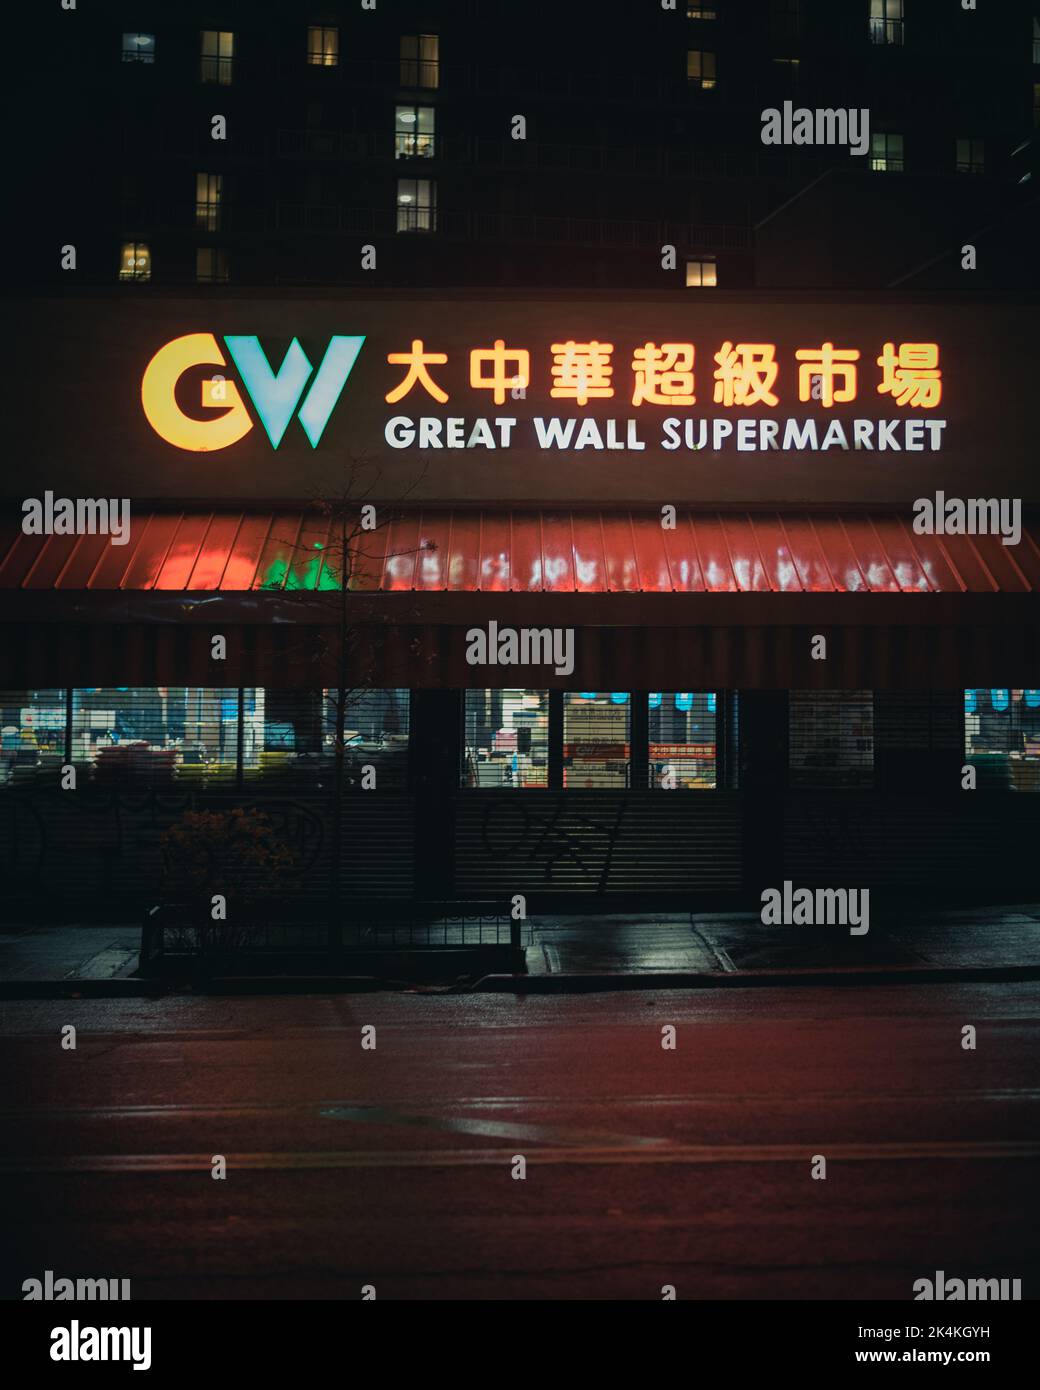 Great Wall Supermarket At Night In Flushing Queens New York 2K4KGYH 